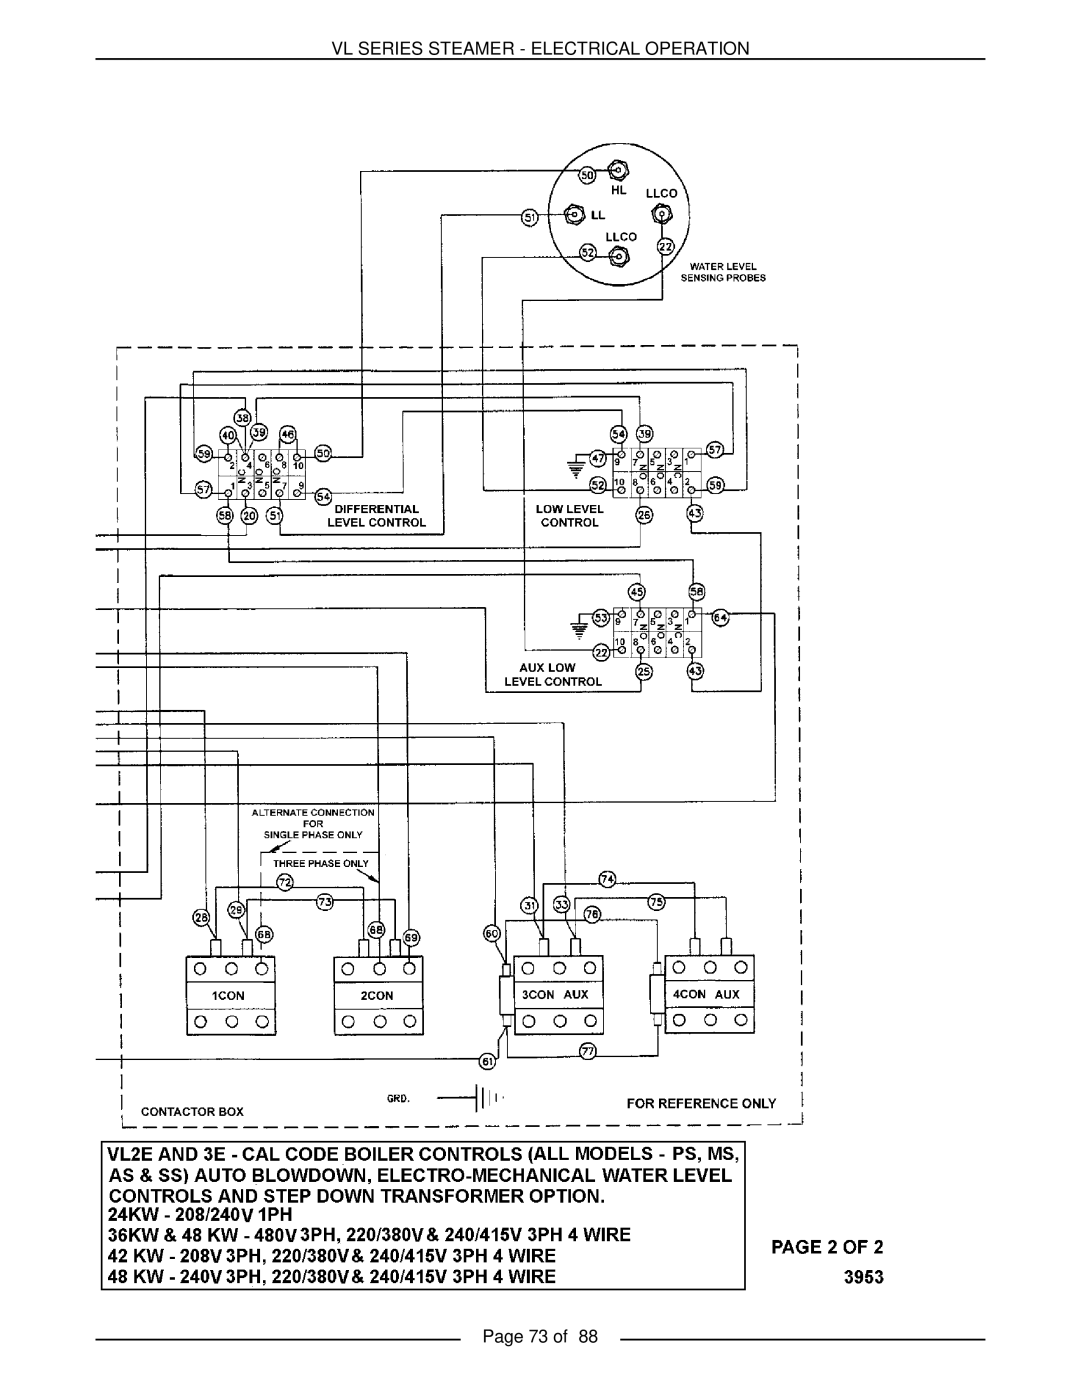 Vulcan-Hart VL2GMS, VL3GMS, VL3GAS, VL2GAS, VL2GSS, VL3GSS, VL3GPS, VL2GPS Vl Series Steamer - Electrical Operation, Page 73 of 